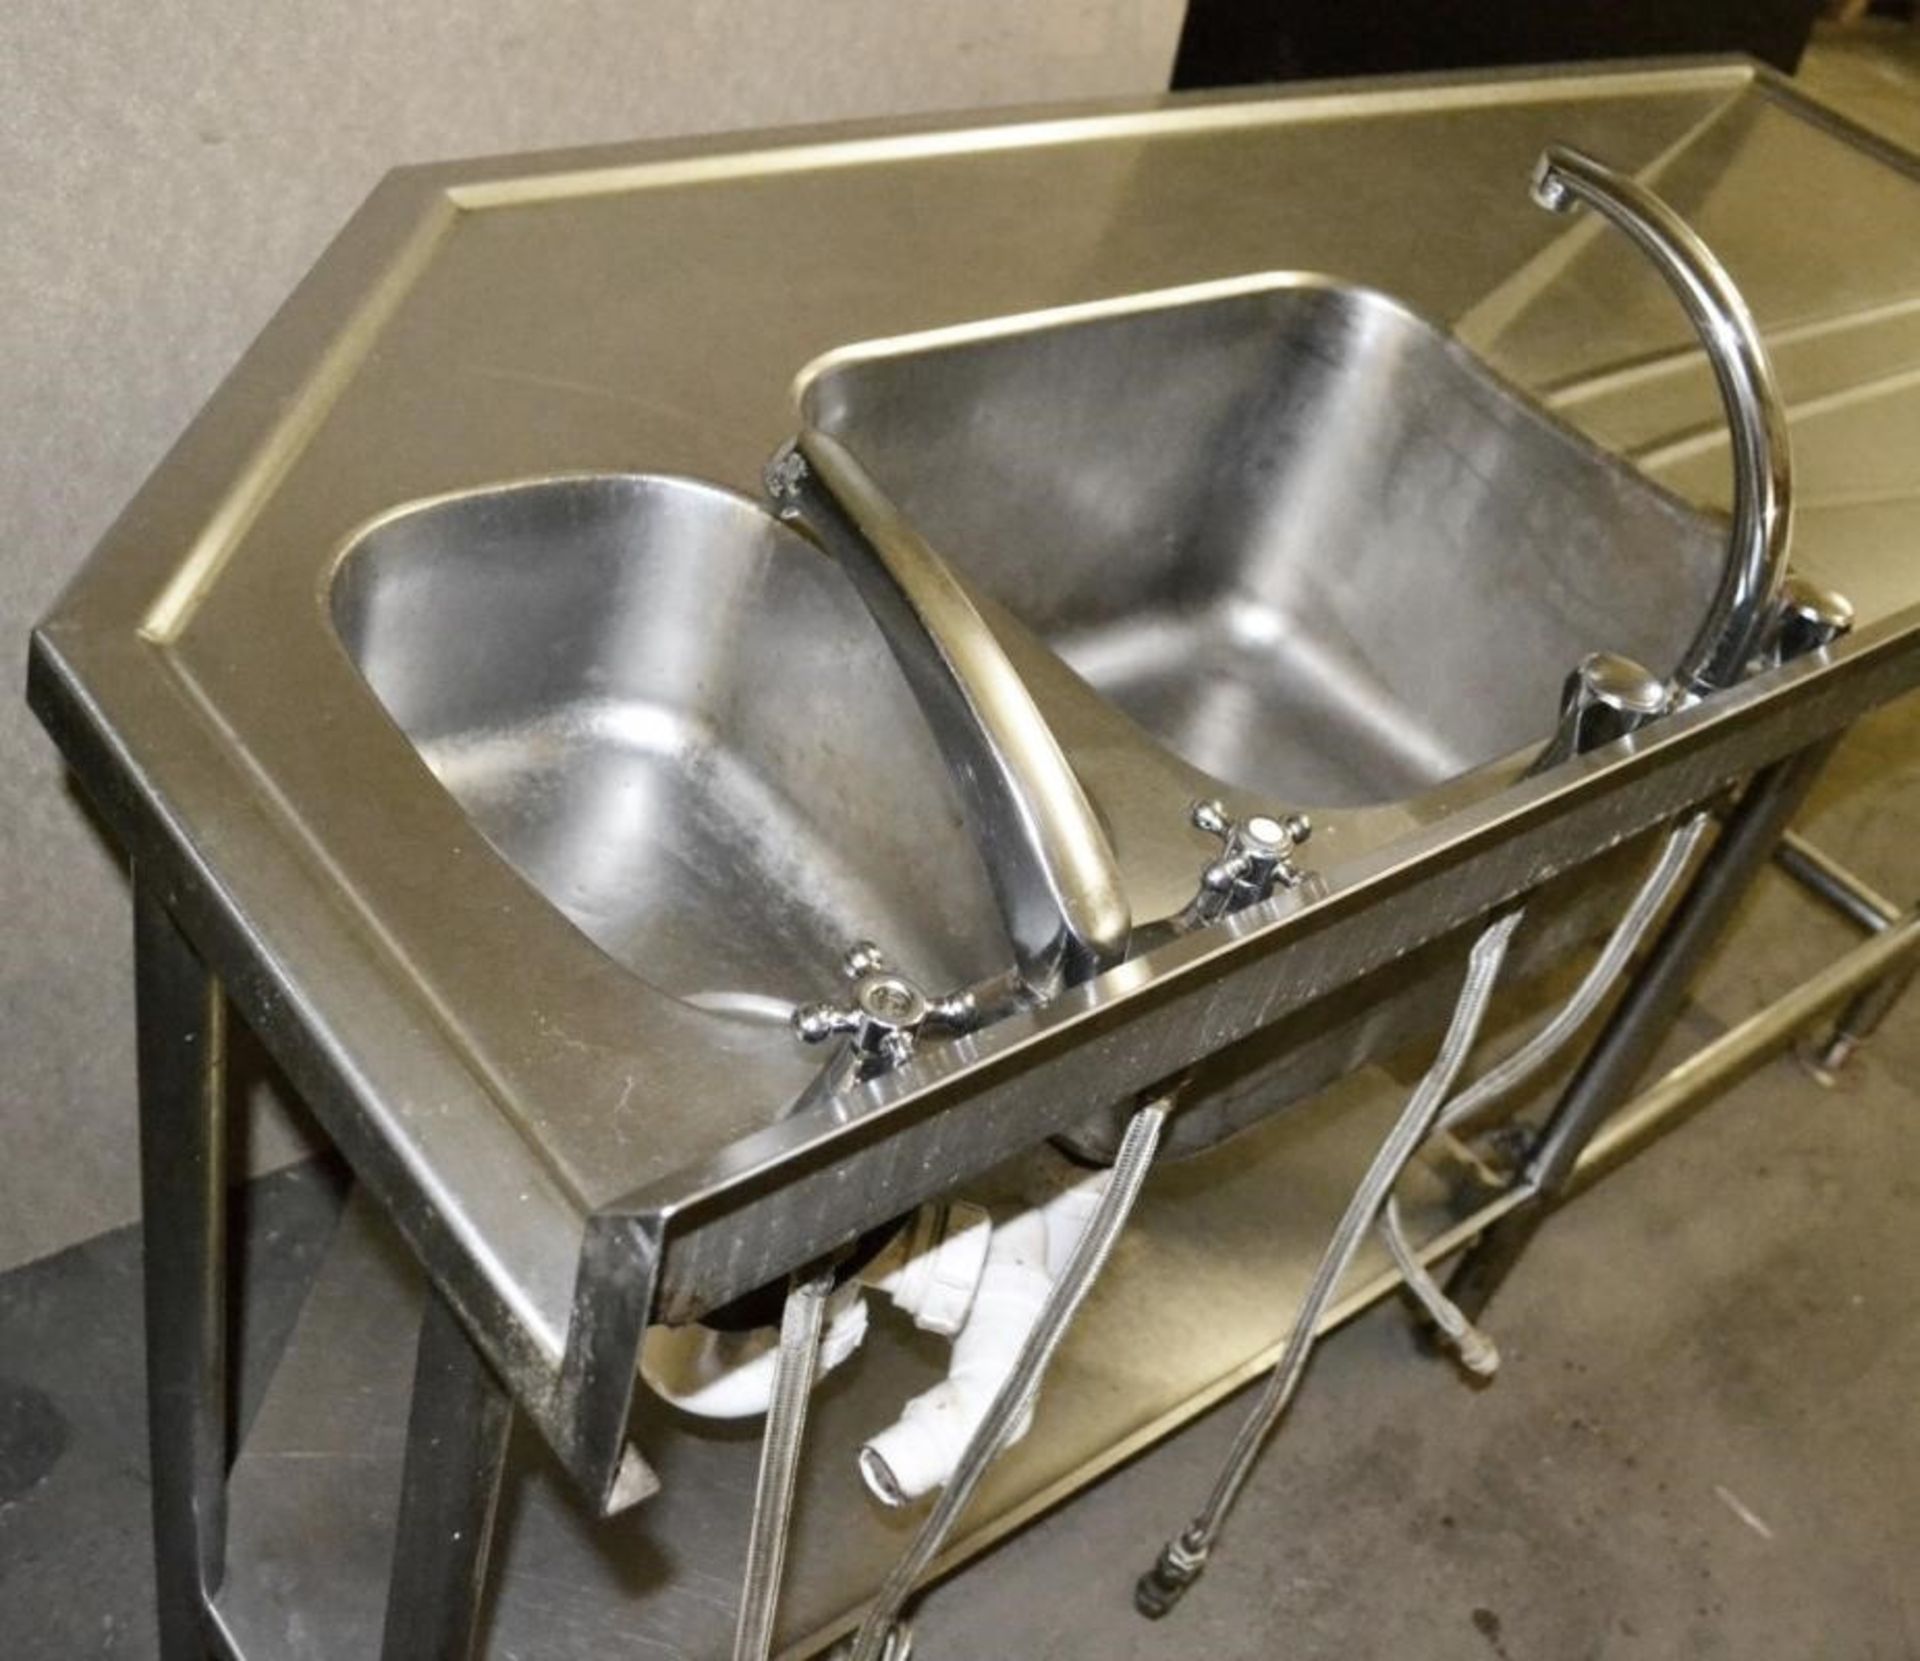 1 x Commercial Right-hand Double Sink Unit With Mixer Taps, Spillage Lip, Splashback and Undershelf - Image 6 of 7